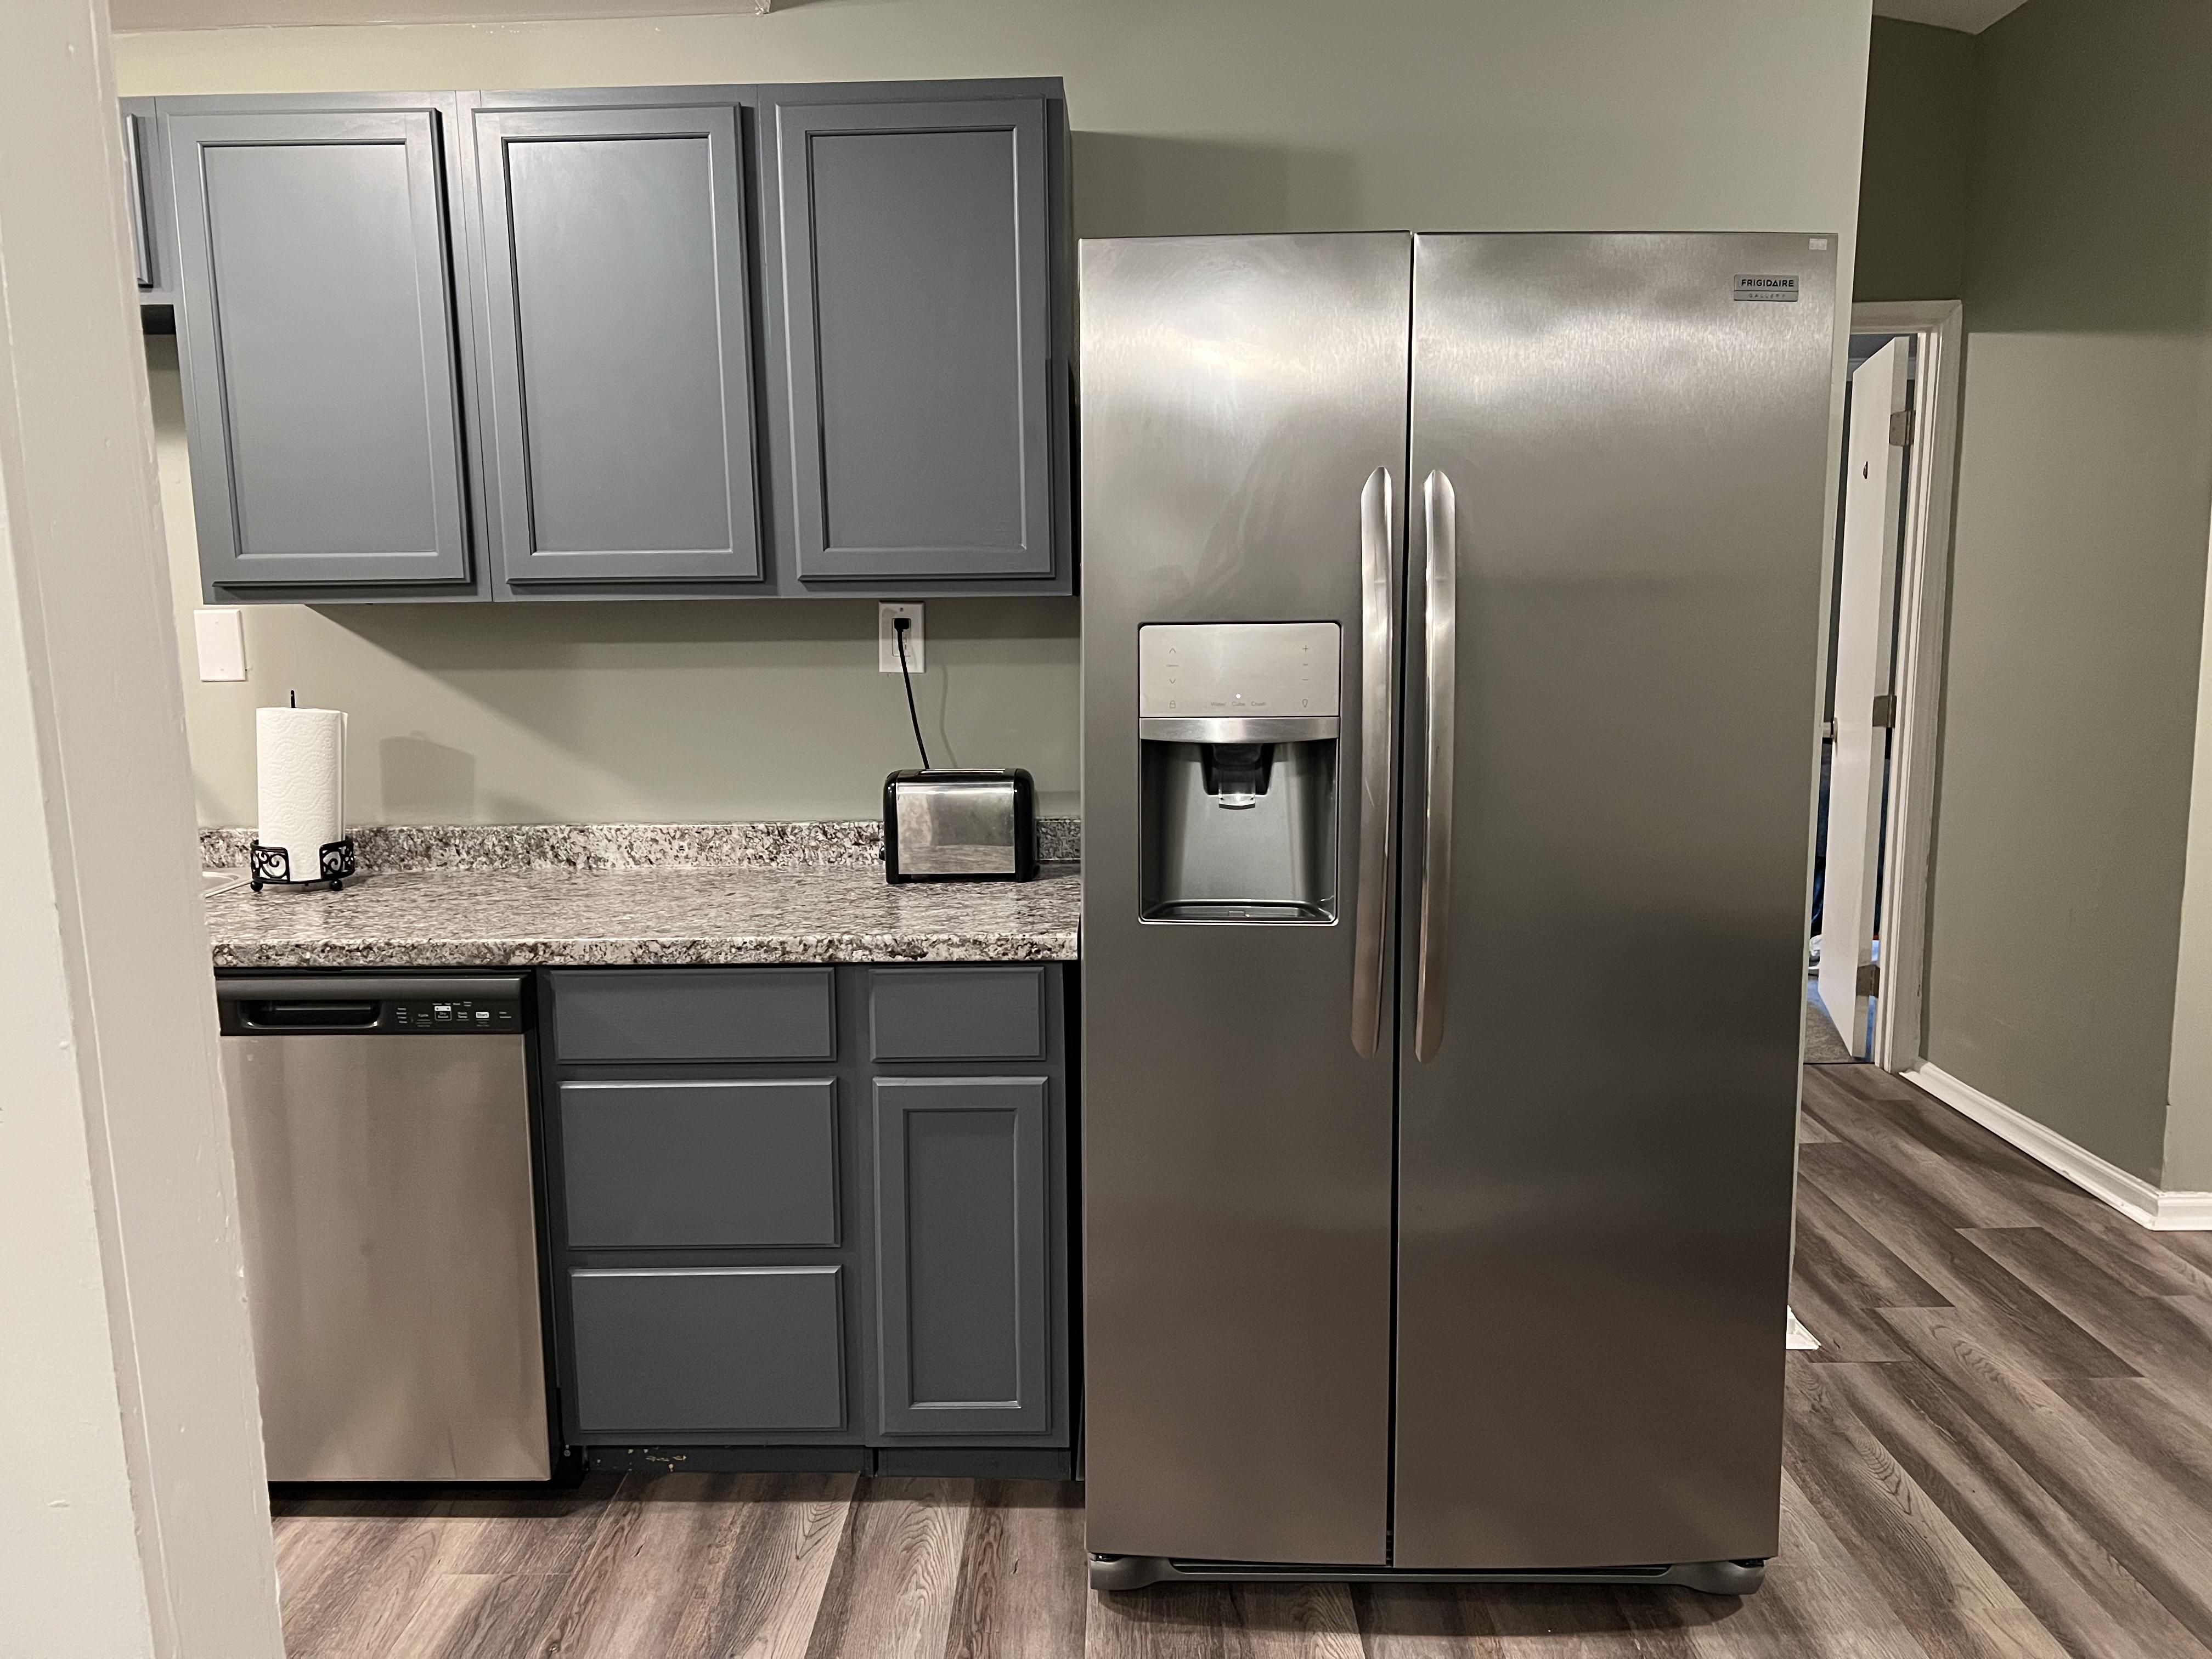 Kitchen - Frigidaire side-by-side digital unit with functional filtered water & ice-maker feature.